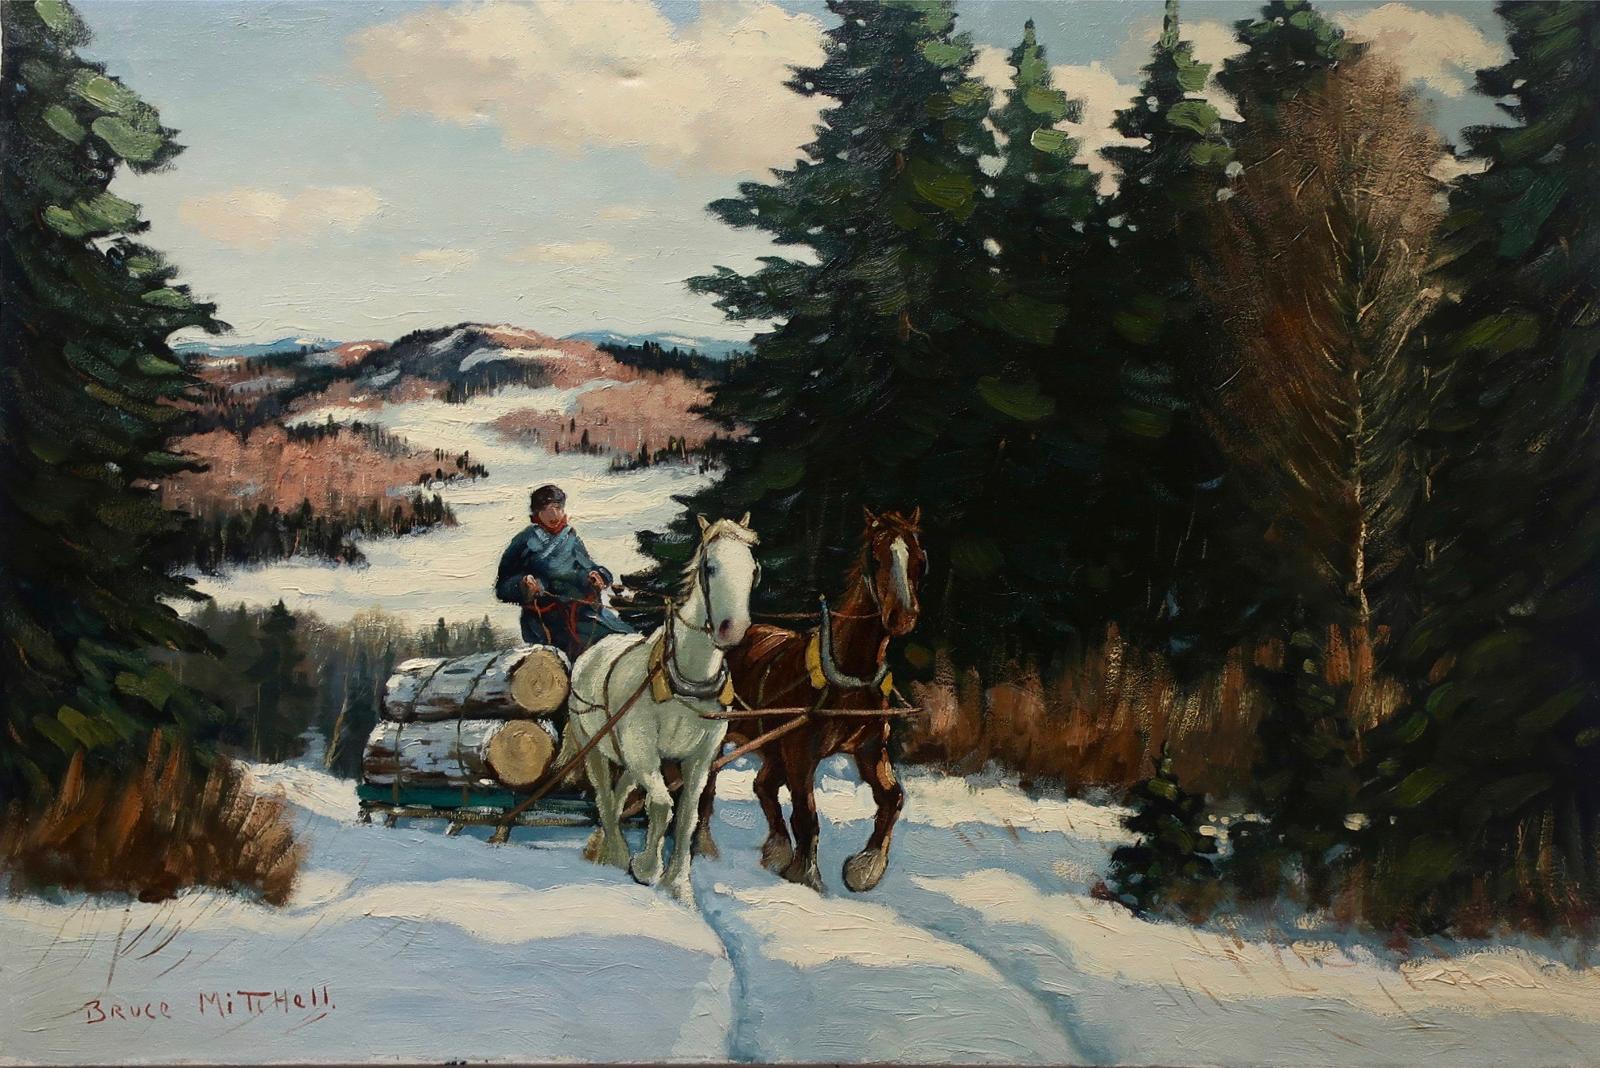 Bruce Mitchell (1912-1995) - Untitled (Hauling Logs In Winter)